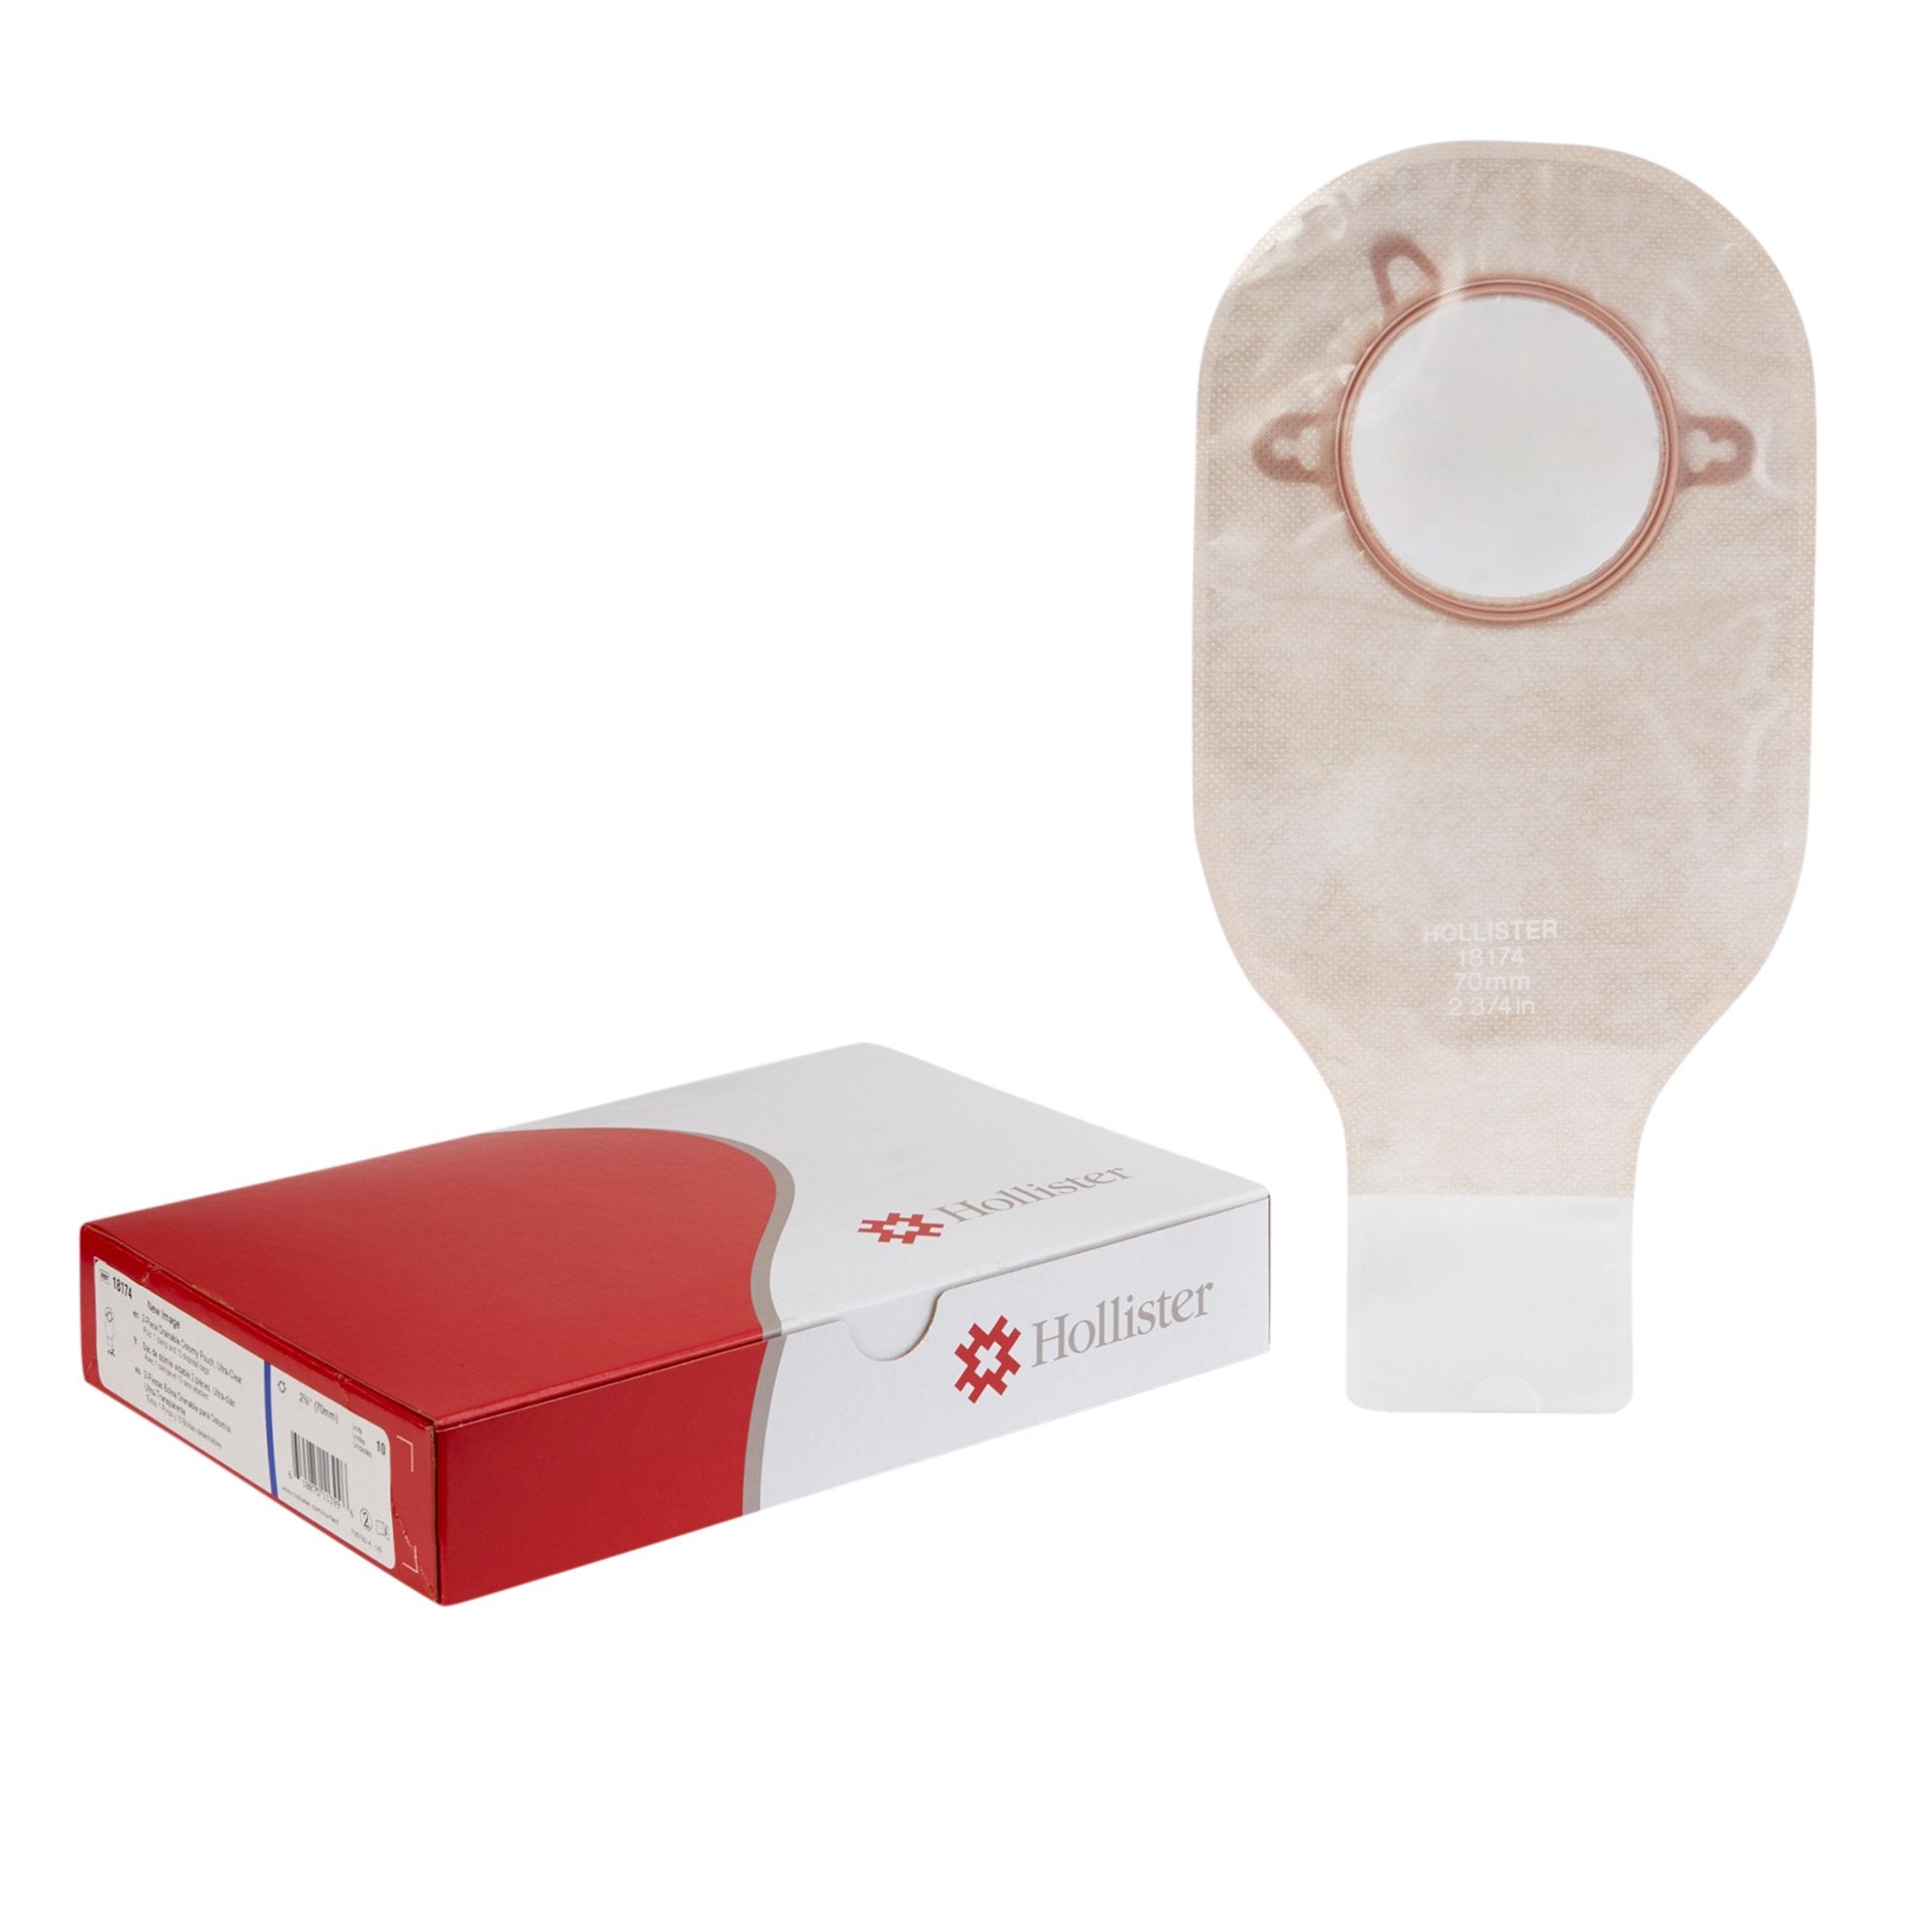 Ostomy Pouch New Image Two-Piece System 12 Inch Length Drainable